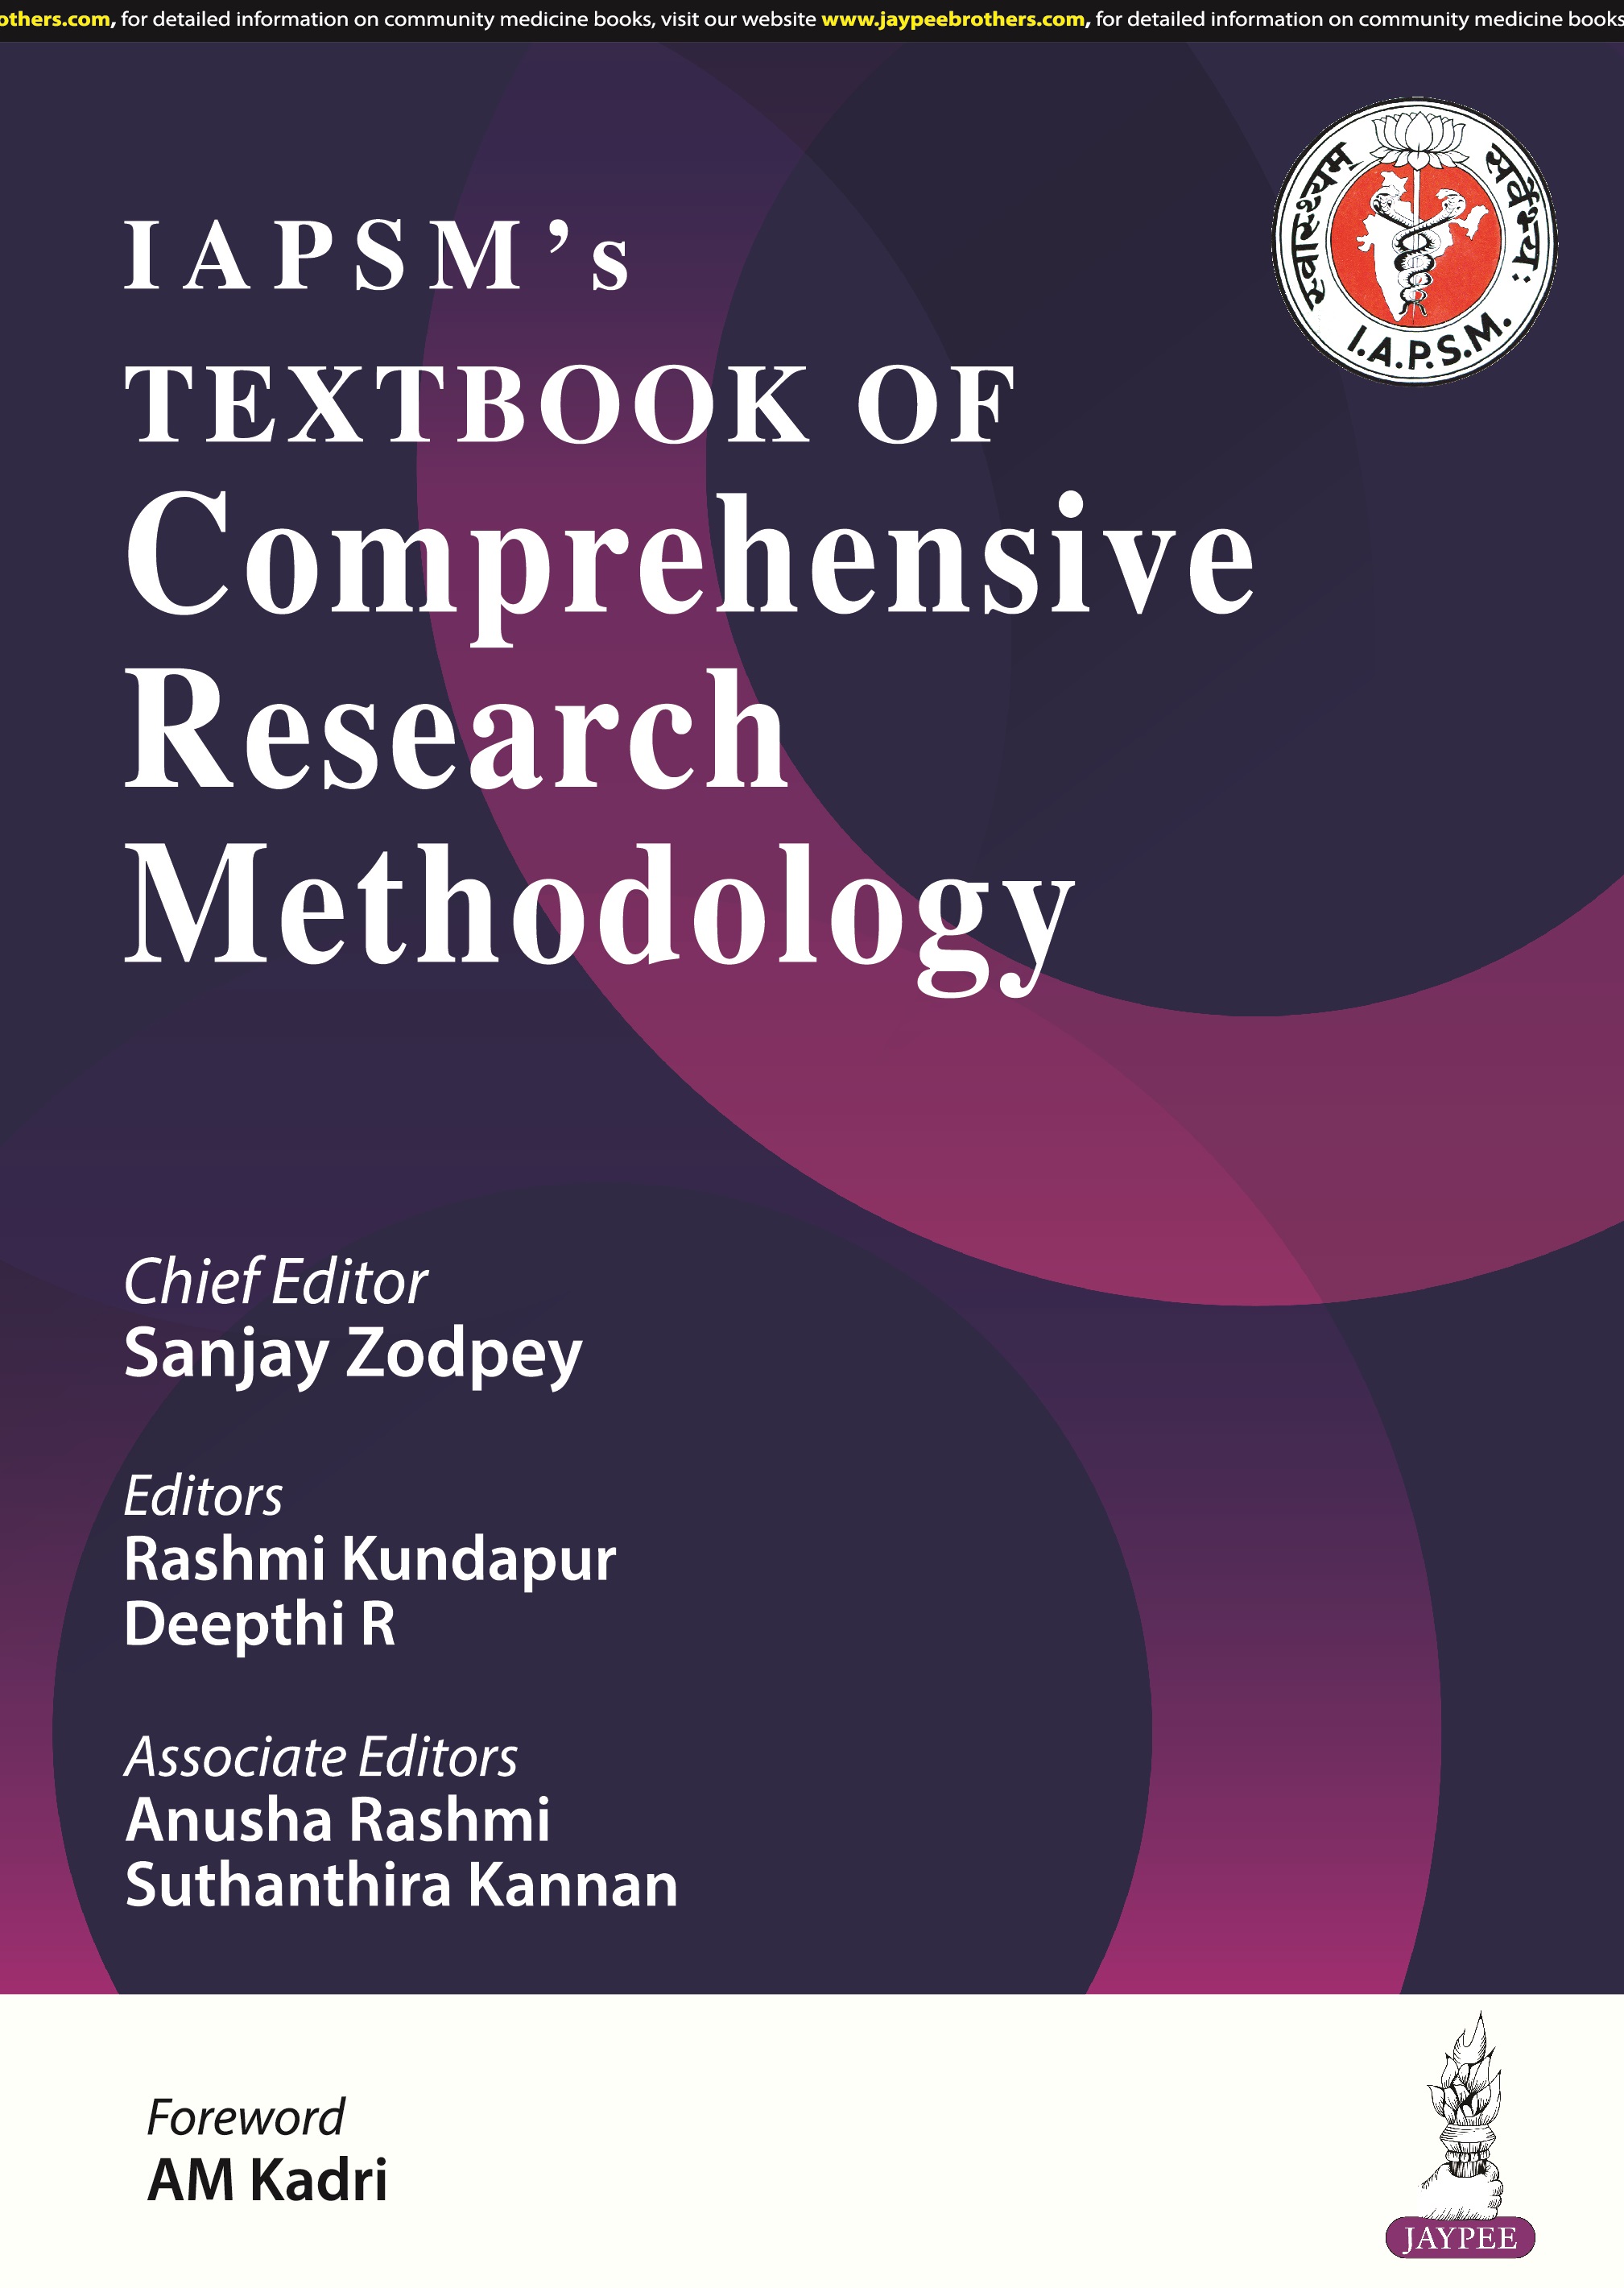 IAPSM’s Textbook of Comprehensive Research Methodology